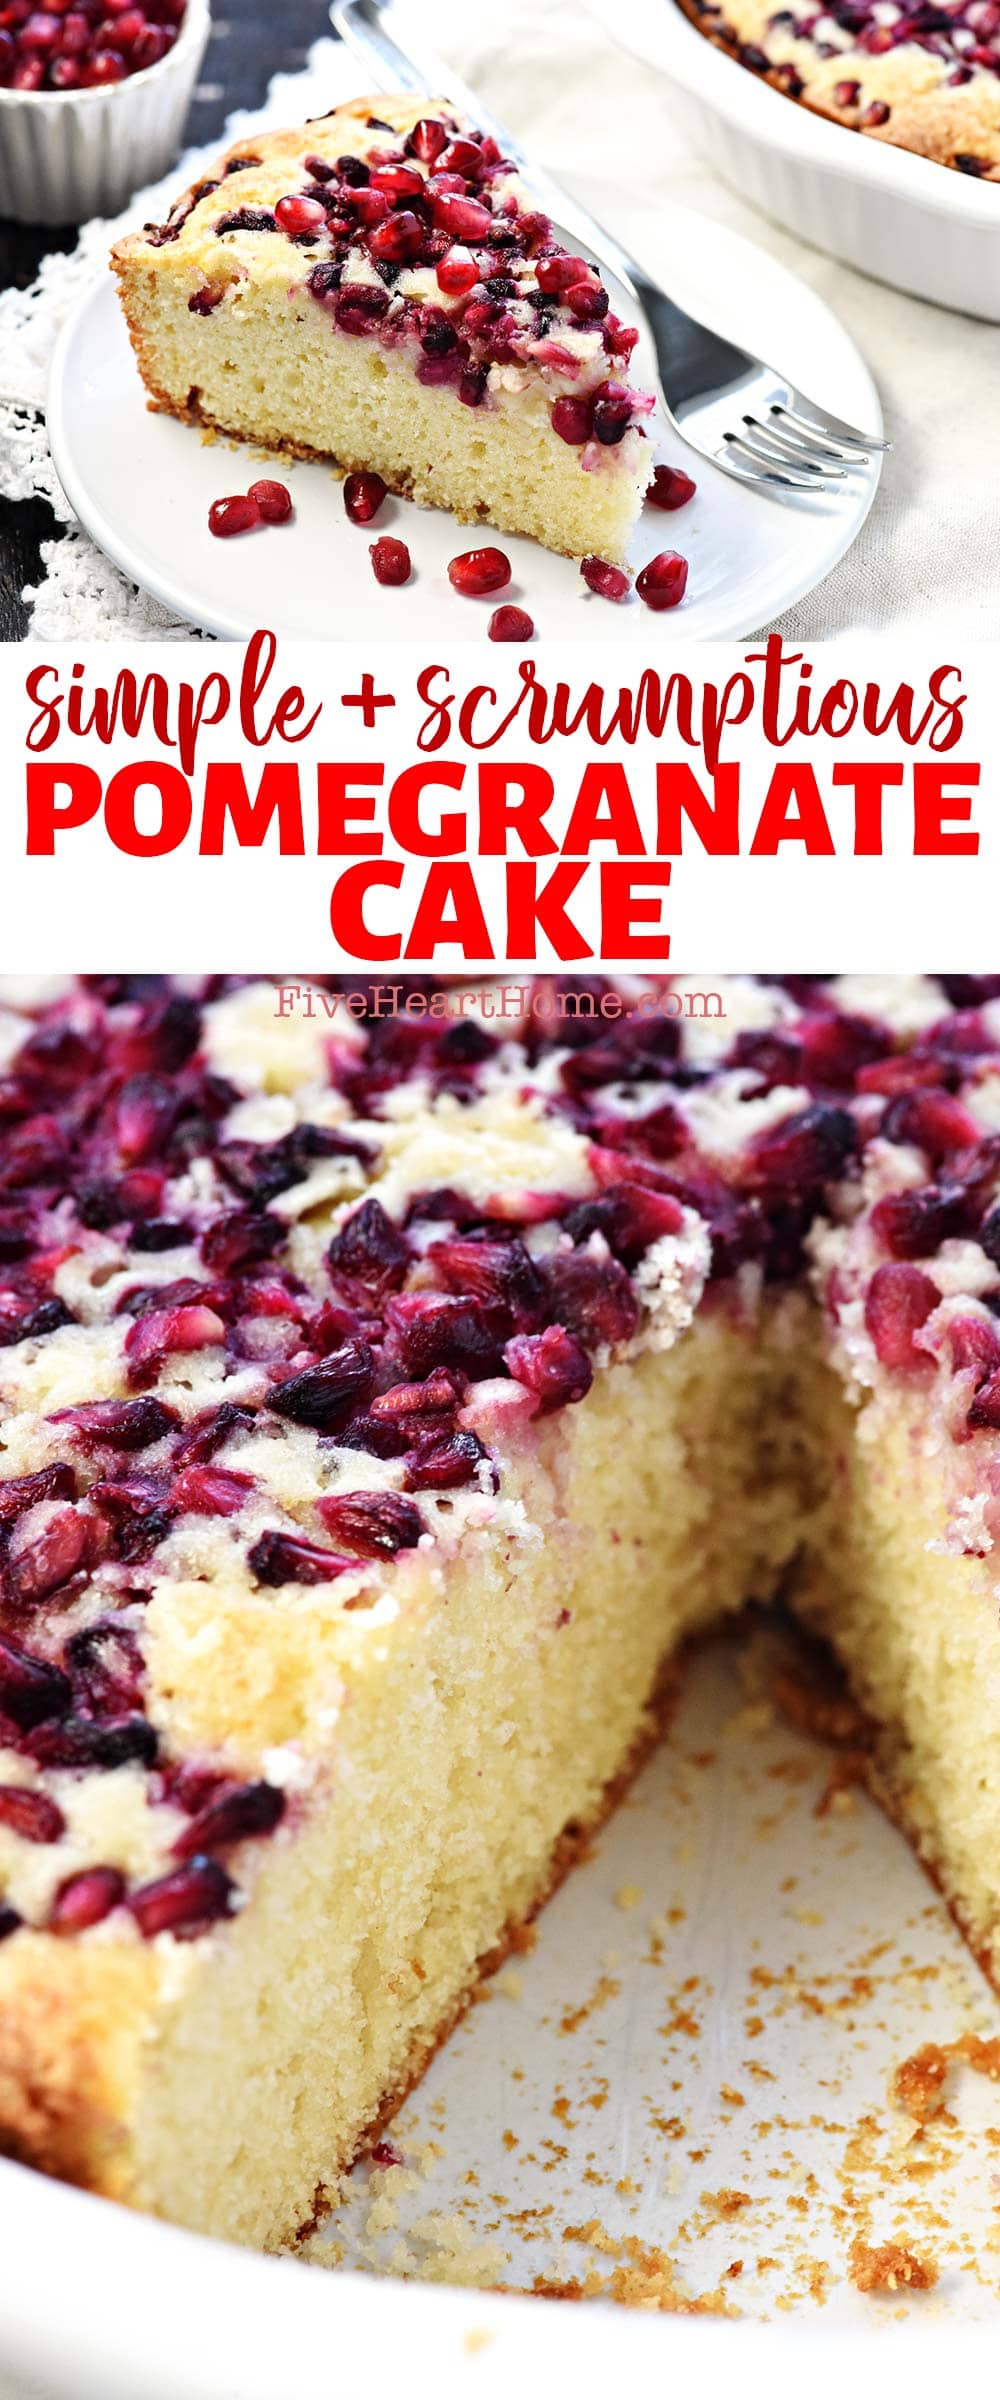 Pomegranate Cake ~ this easy and delicious recipe features a simple golden batter topped with juicy pomegranate arils, baked to sweet and tender perfection! | FiveHeartHome.com via @fivehearthome